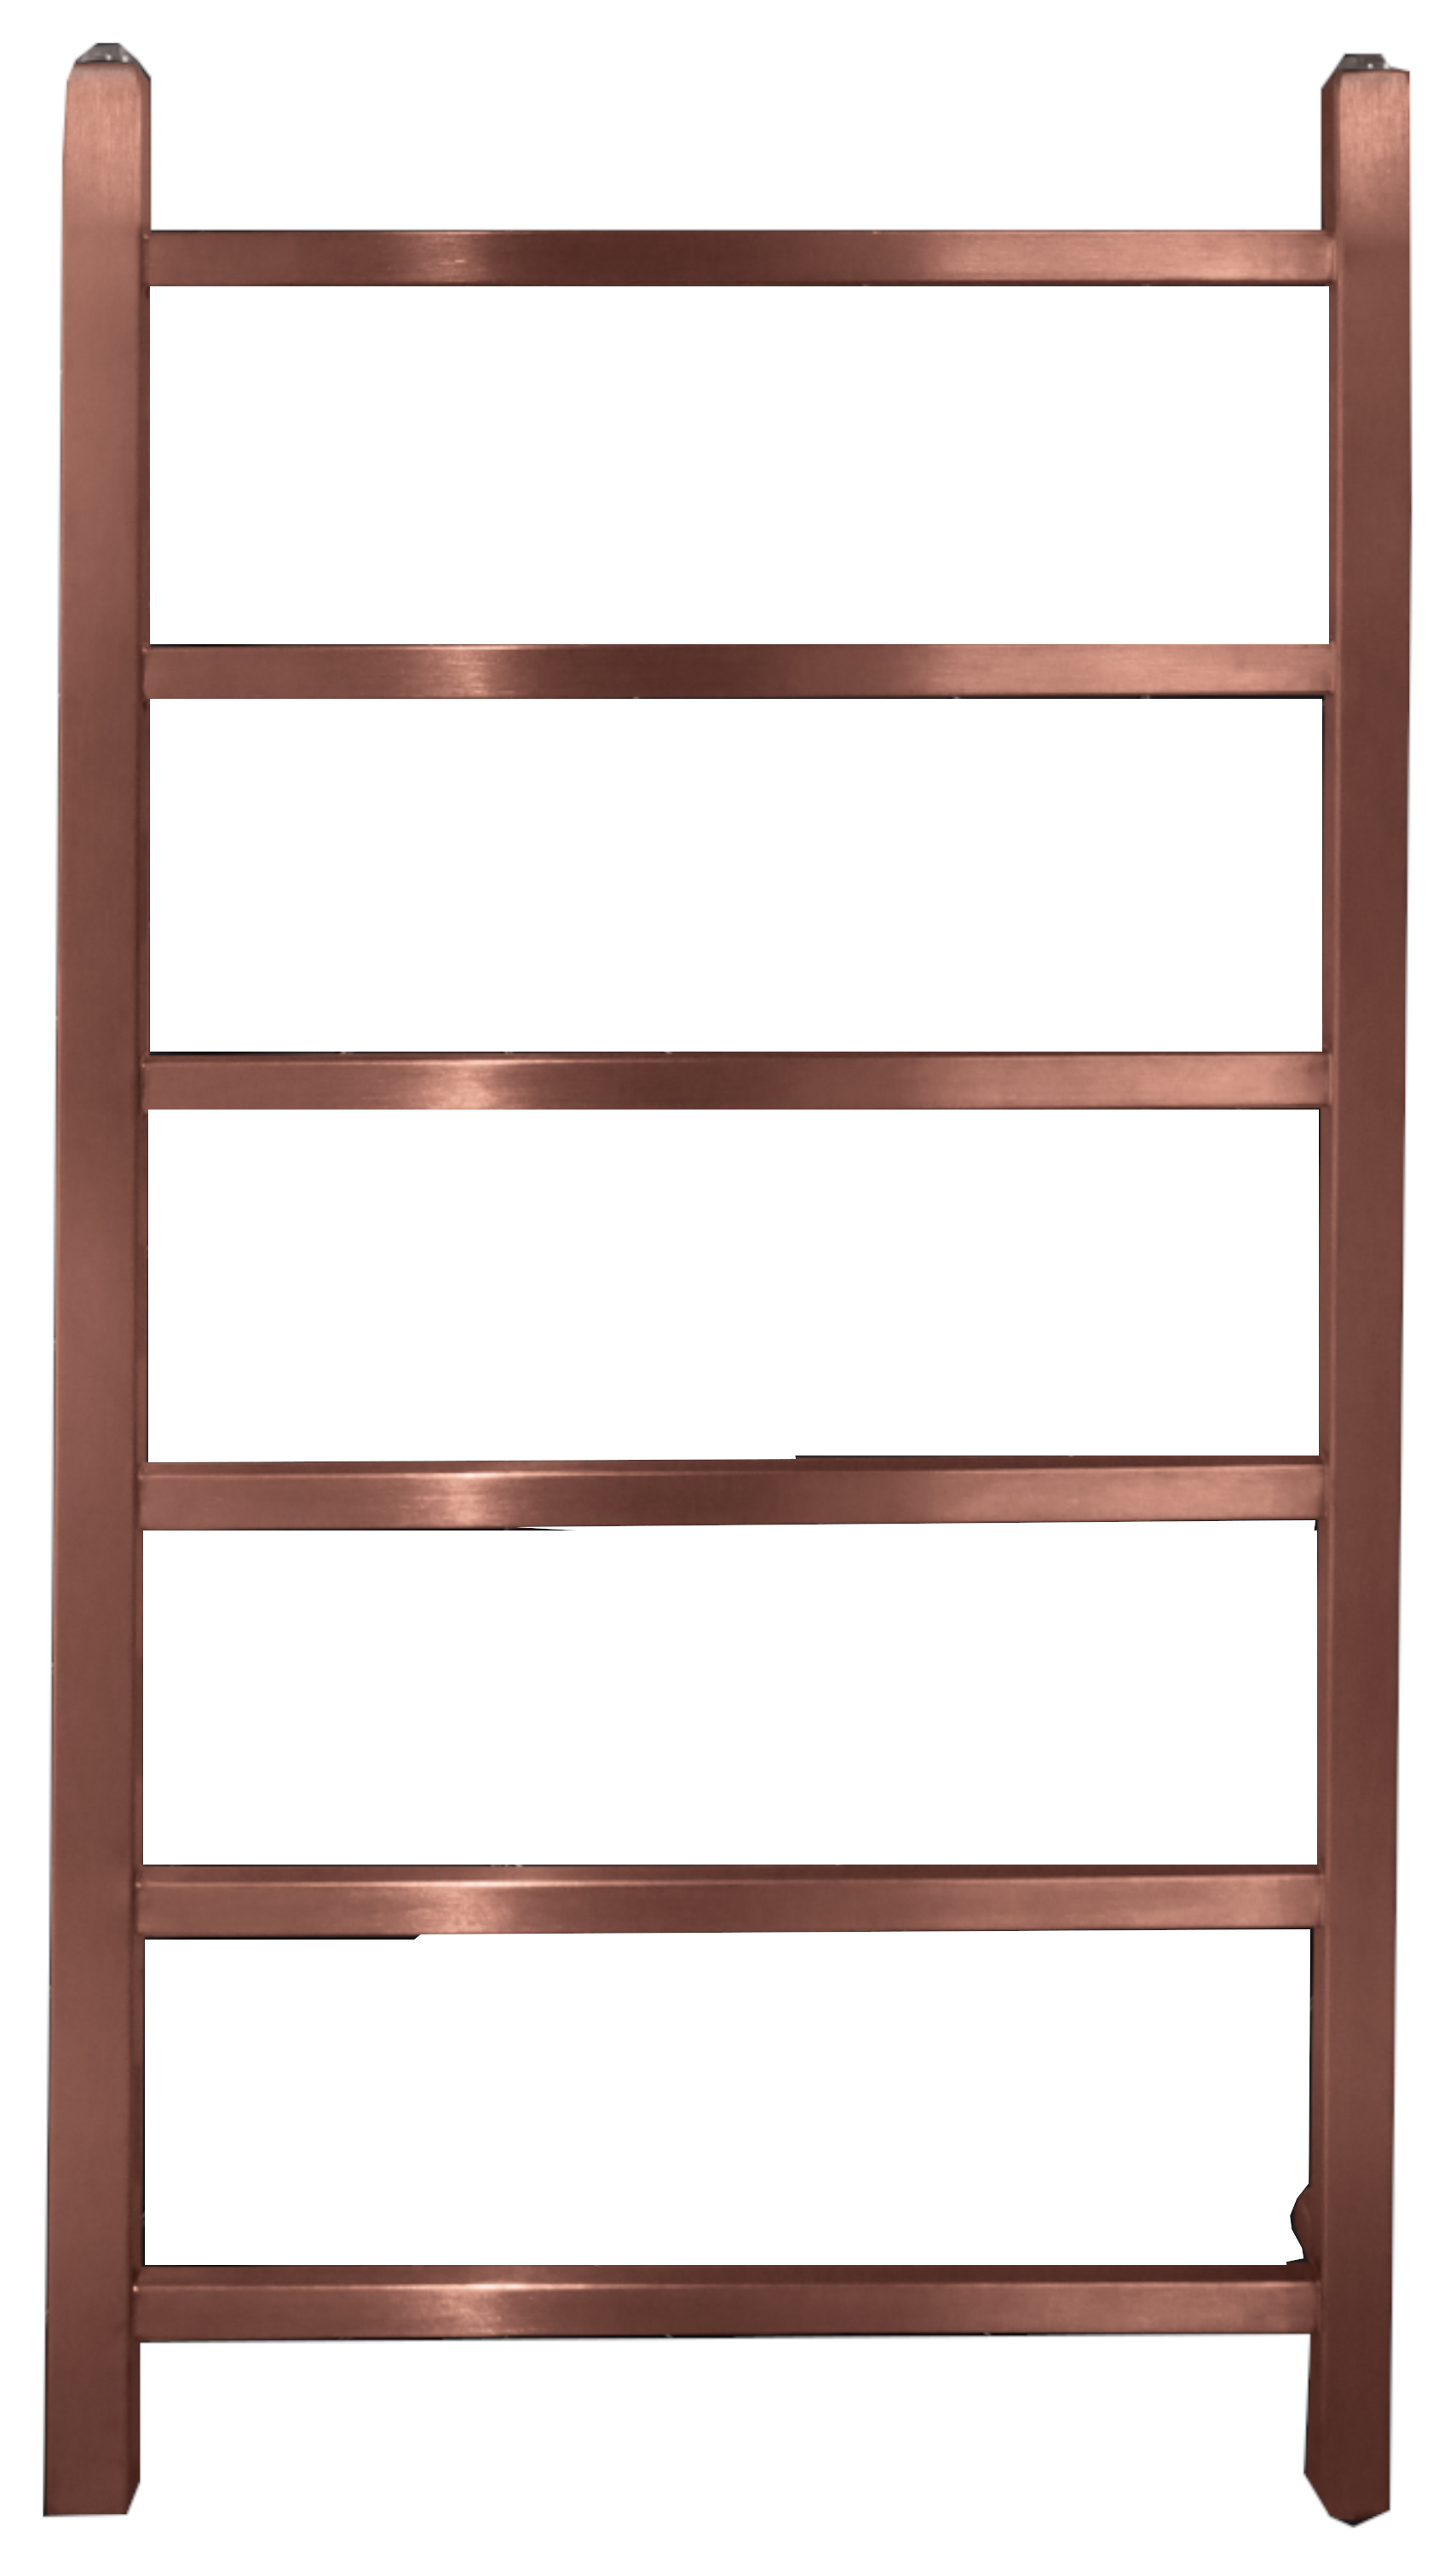 Towelrads Diva Rose Gold Dry Electric Non Thermostatic Towel Radiator - 800 x 500mm